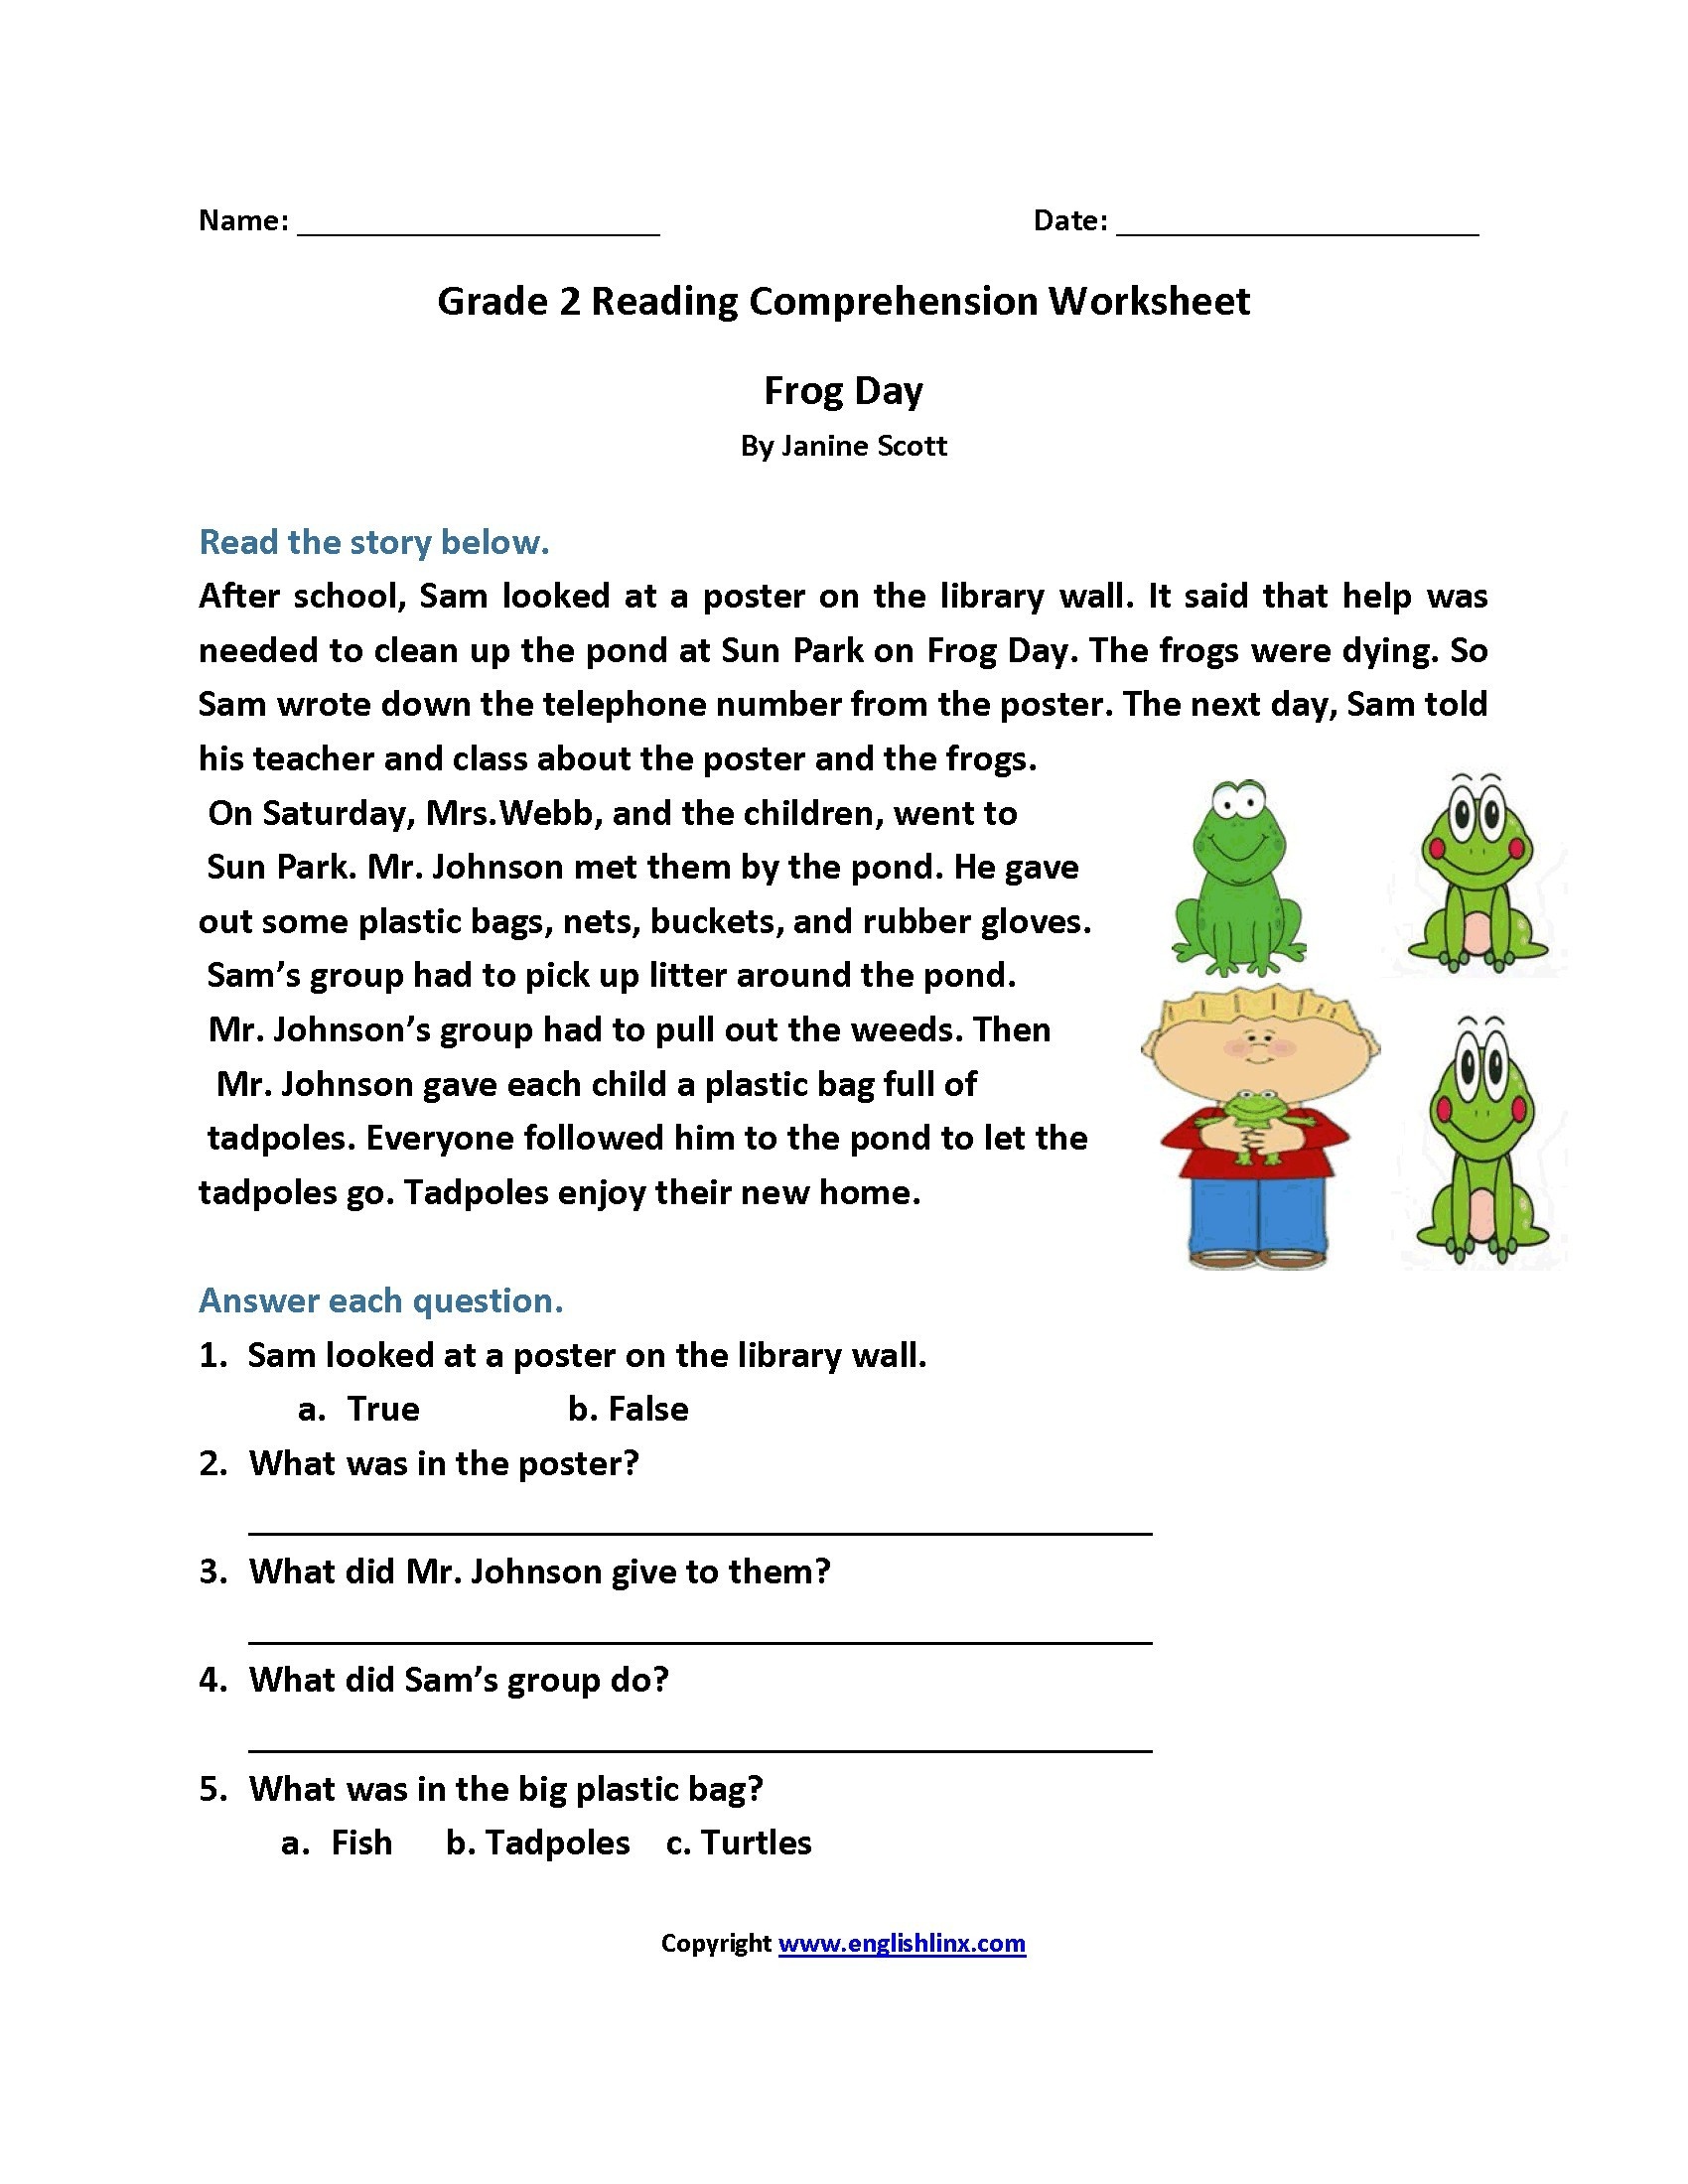 free-printable-short-stories-with-comprehension-questions-free